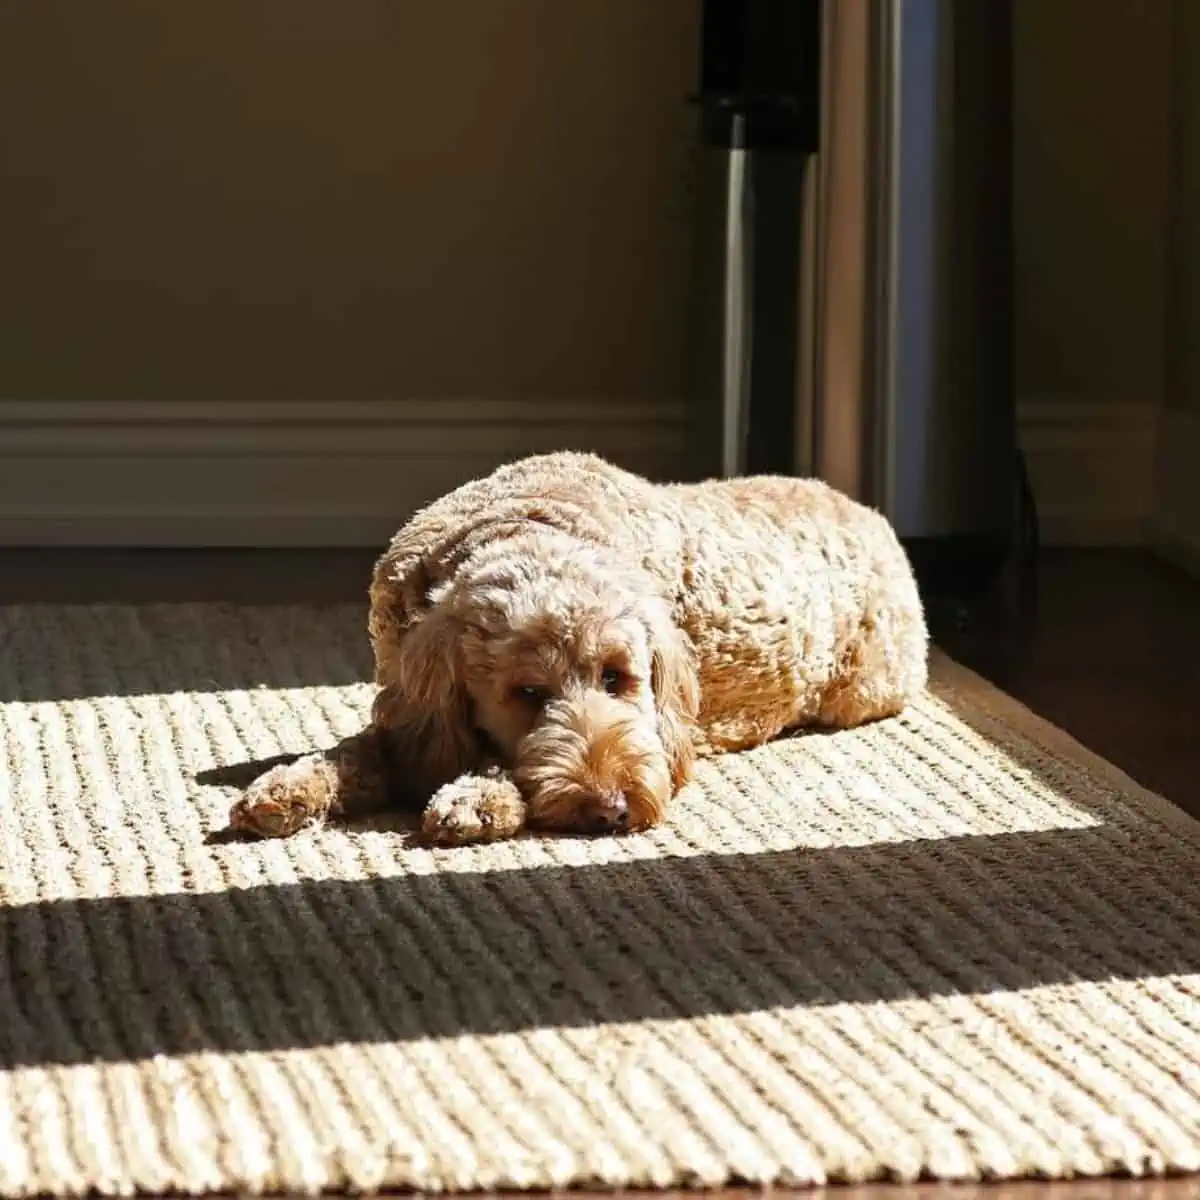 Goldendoodle soaking in the sun